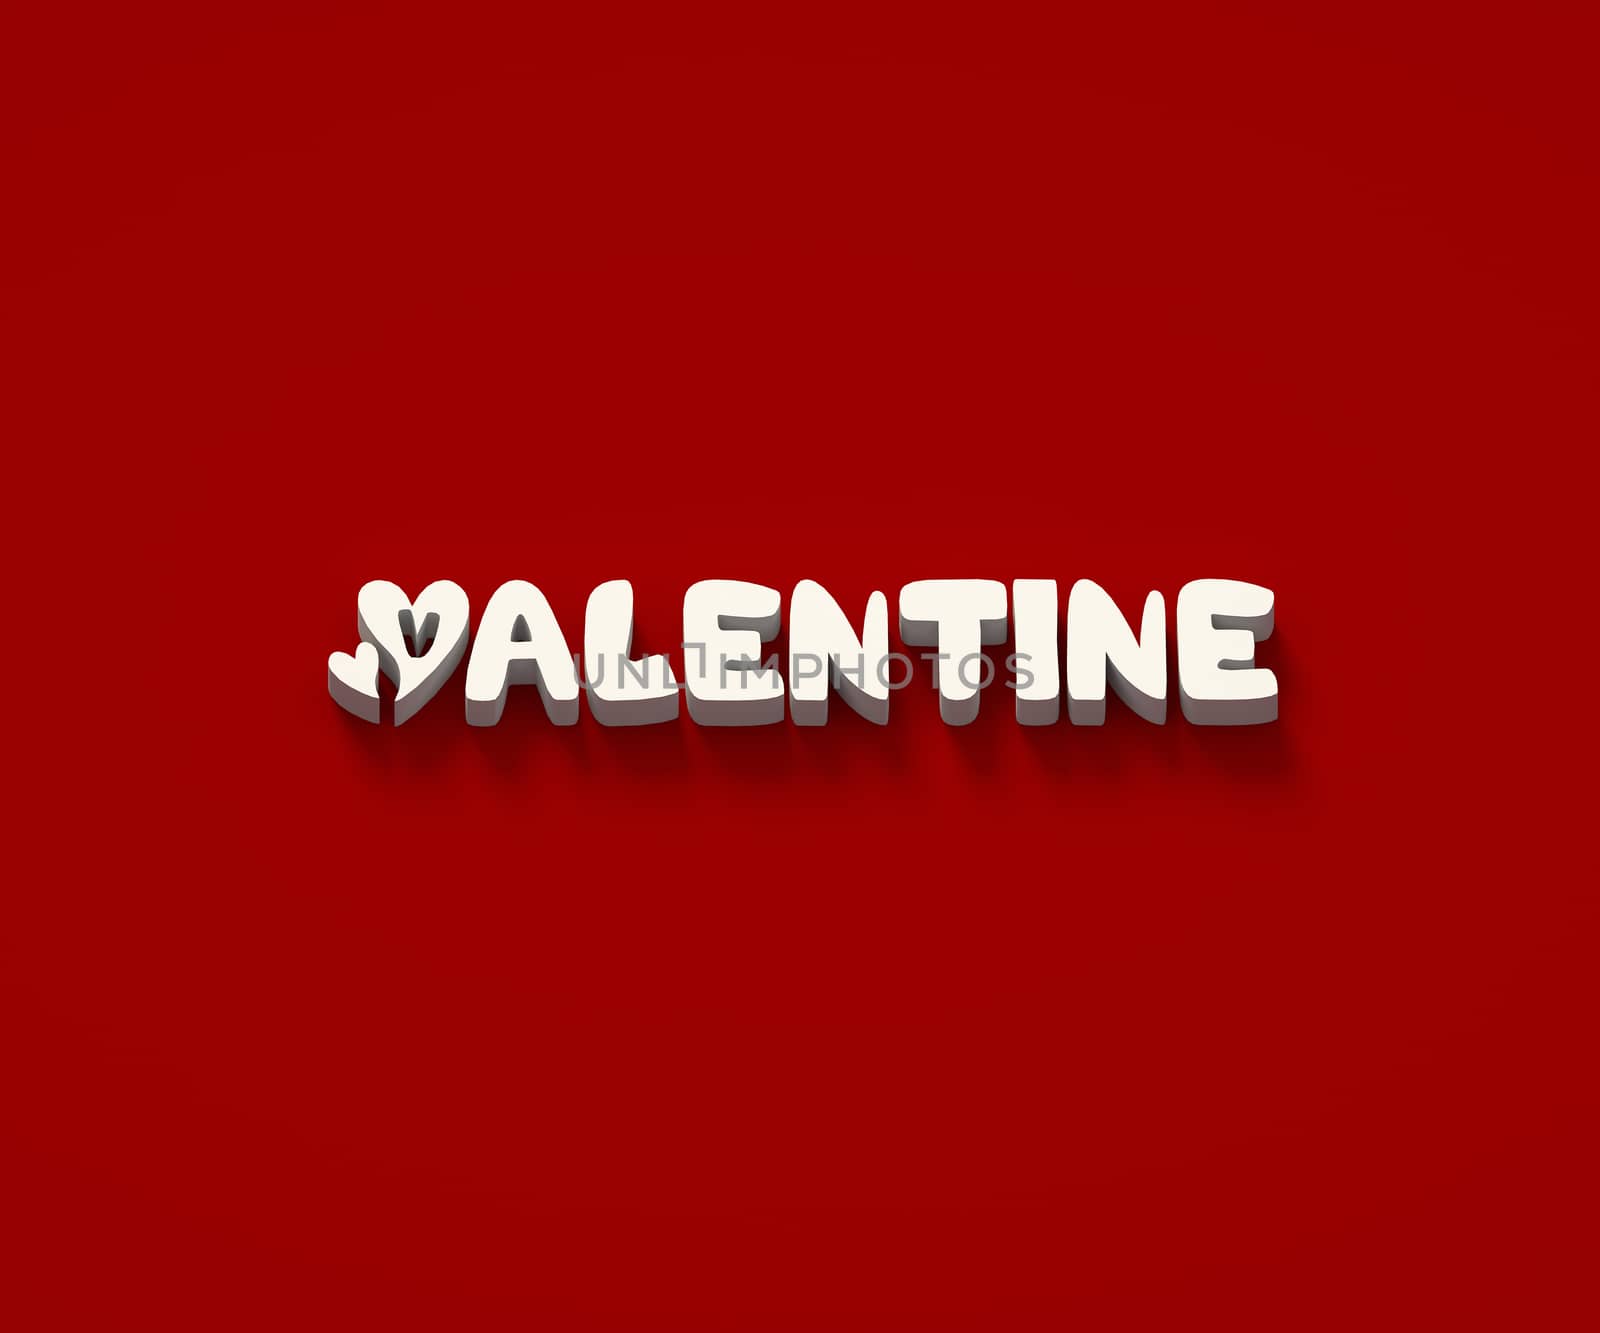 WHITE 3D WORDS OF 'VALENTINE' ON RED PLAIN BACKGROUND